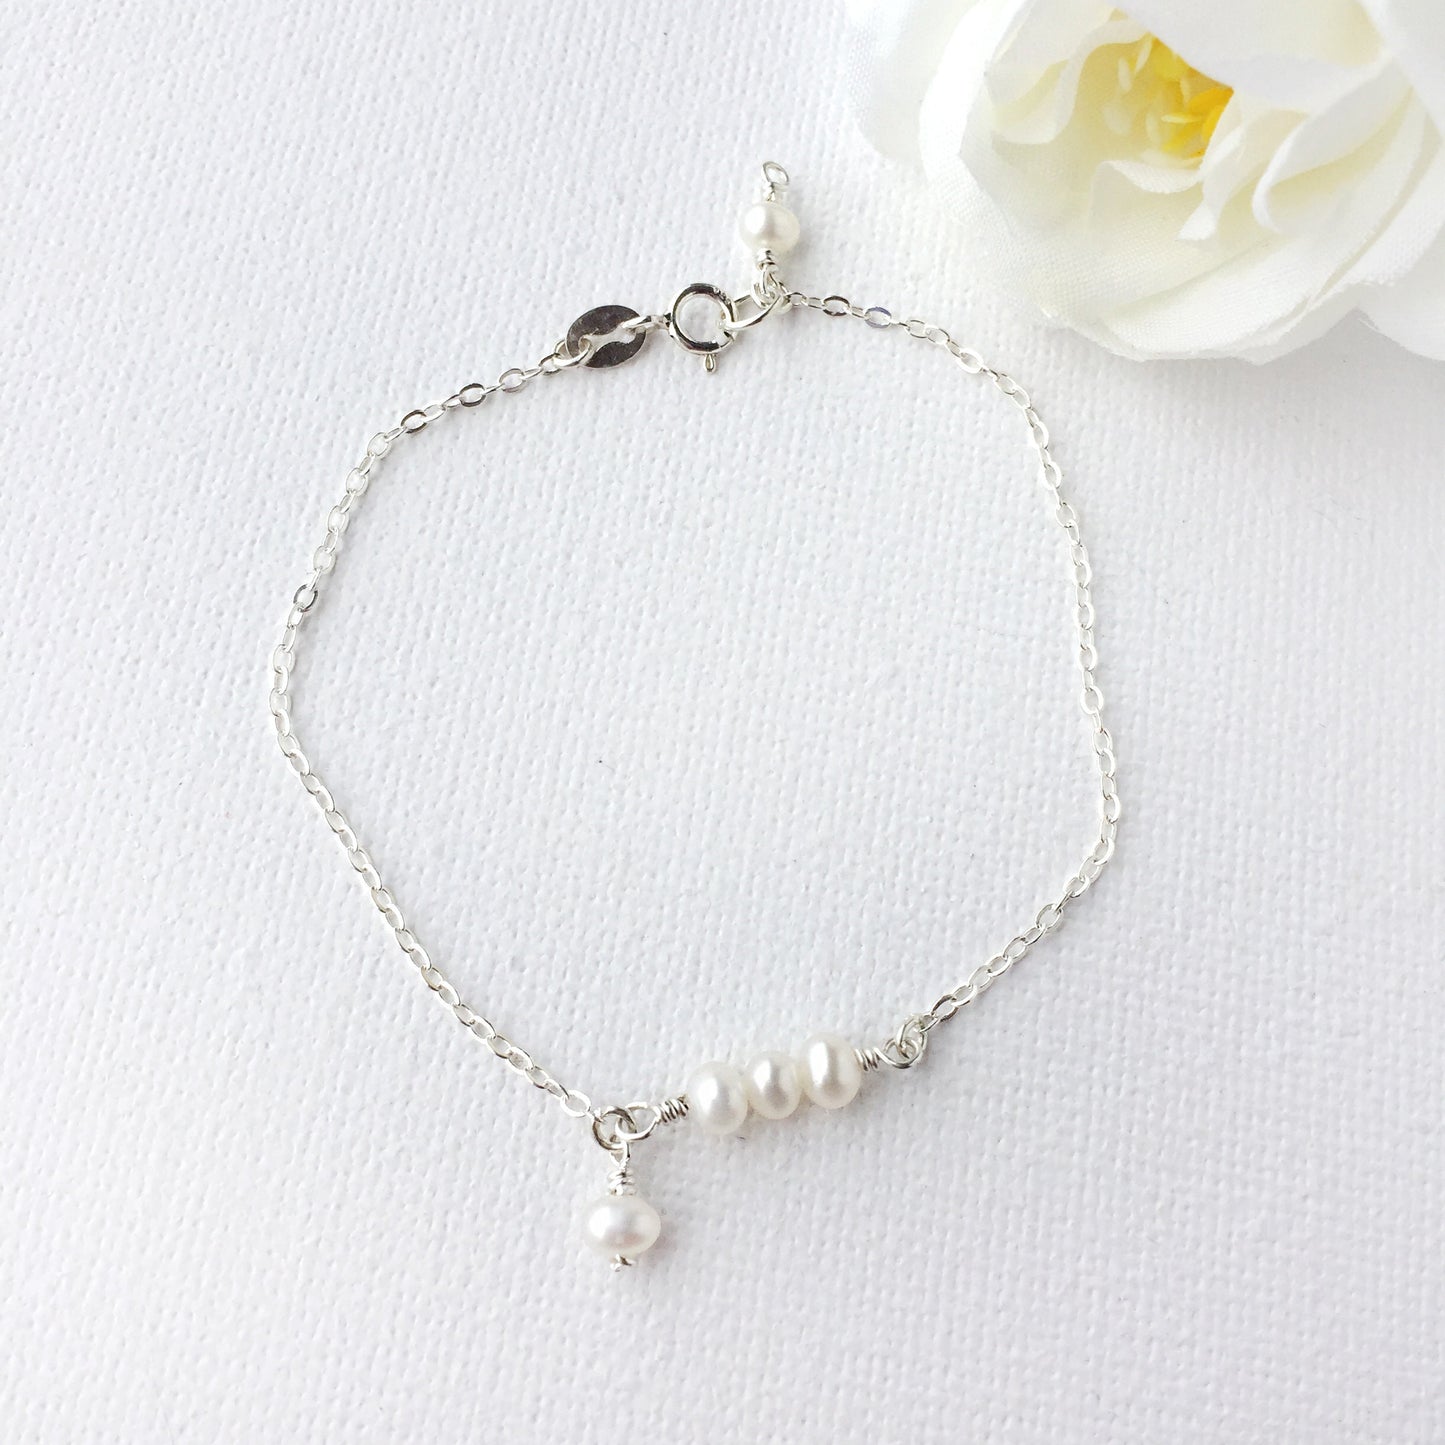 Delicate Freshwater Pearl Bracelet with Charm